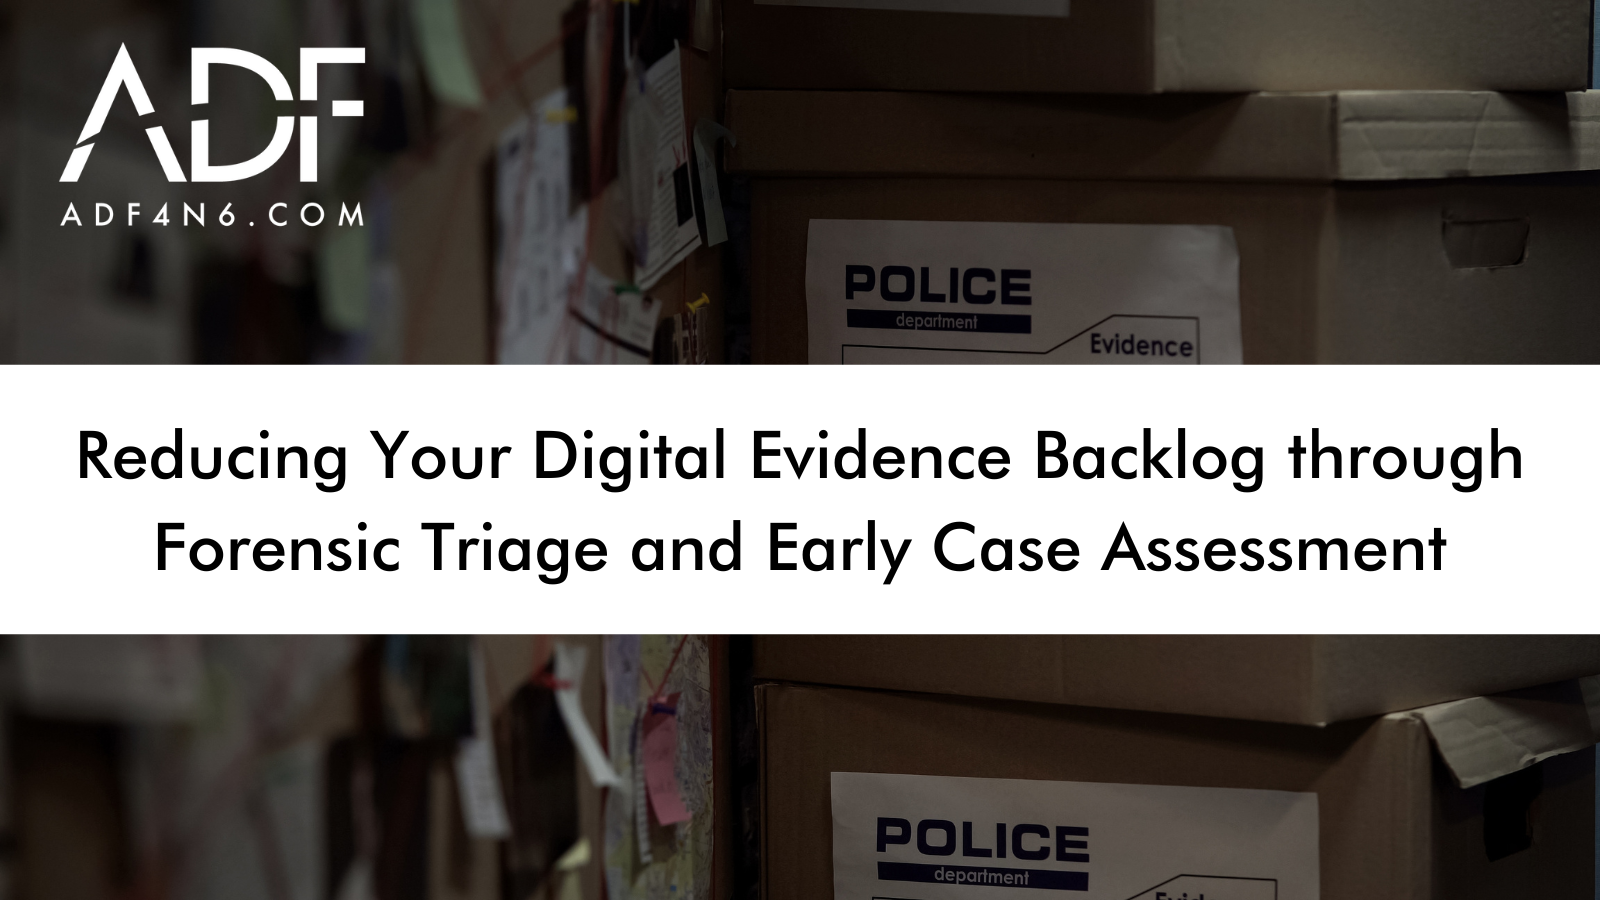 Digital Evidence Backlog: Forensic Triage and Early Case Assessment